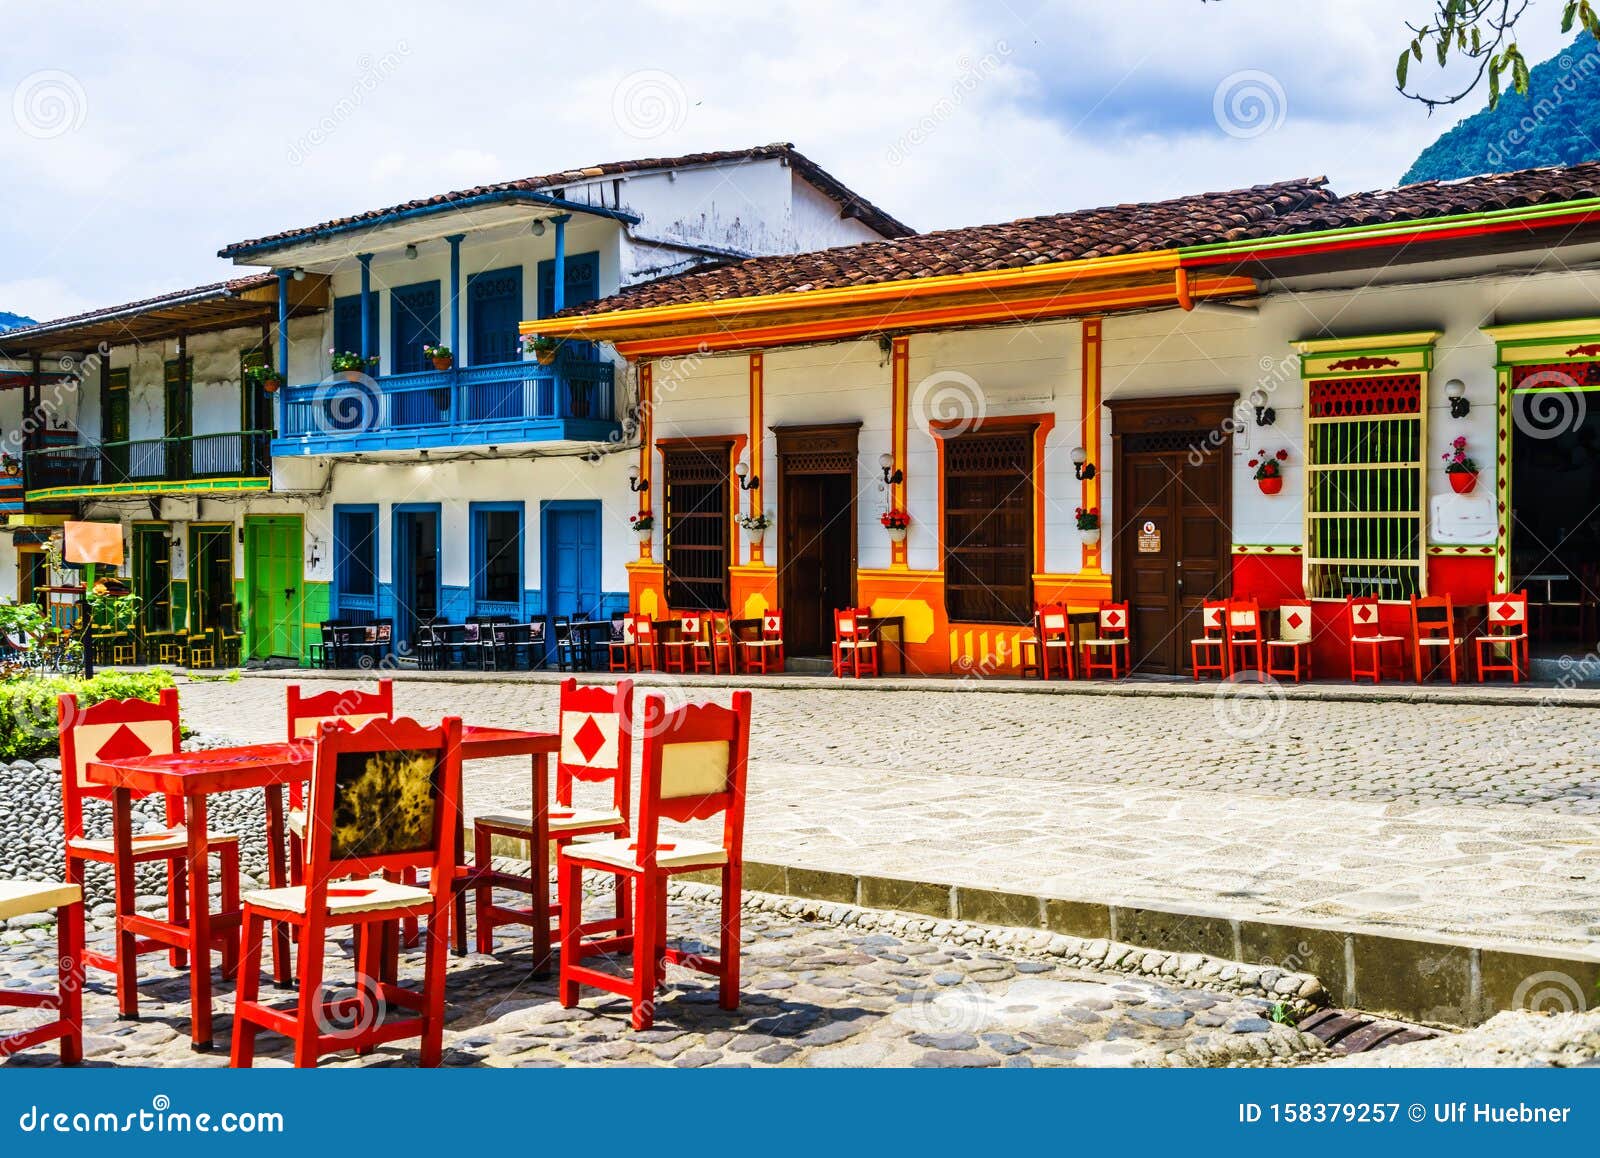 view on colonial architecture in the picturesque town of jardin, antioquia, colombia